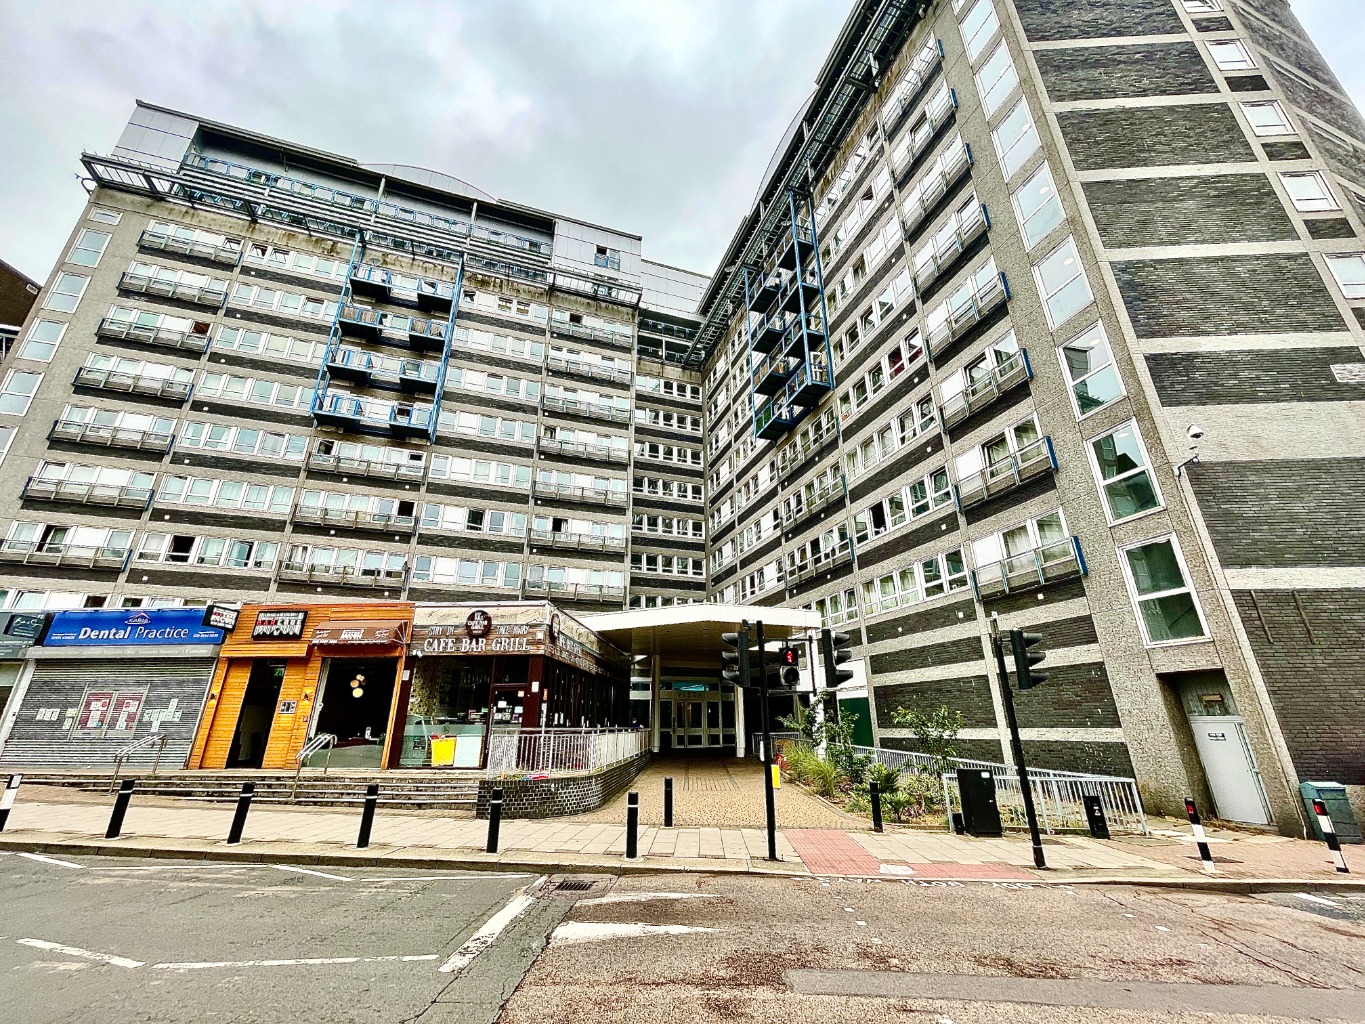 The property is situated in Woolwich town centre, so has excellent transportation links on your doorstep, with the DLR and mainline railway station on